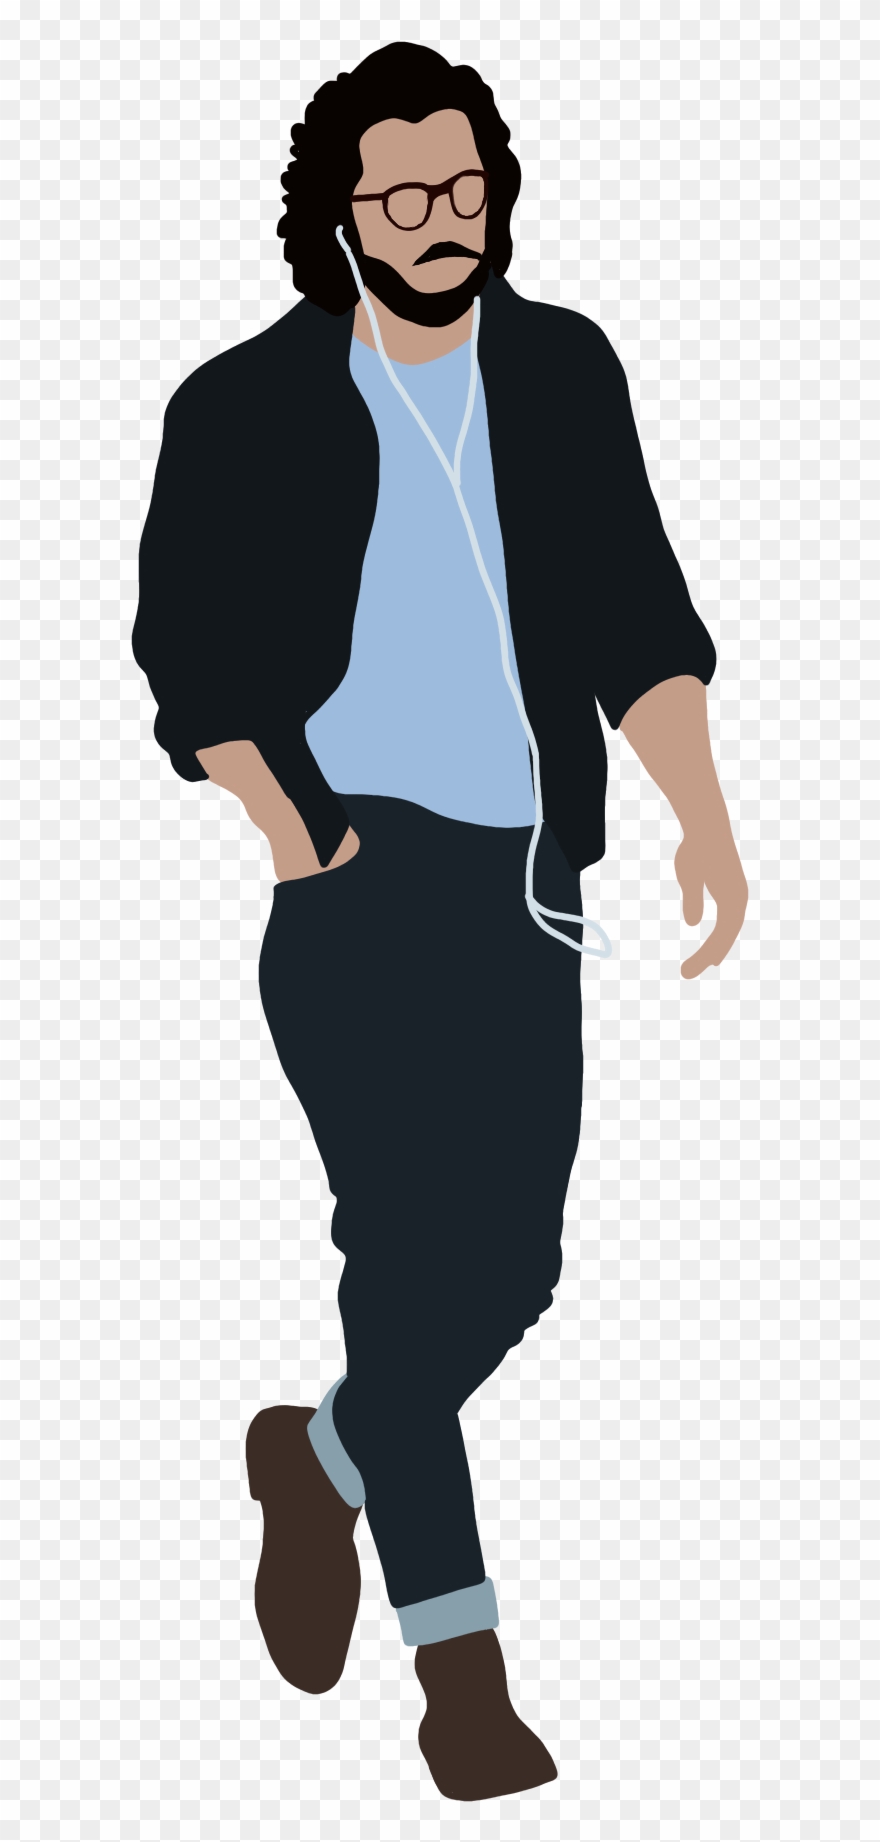 People Flat Illustration On Behance People Png, Cut.